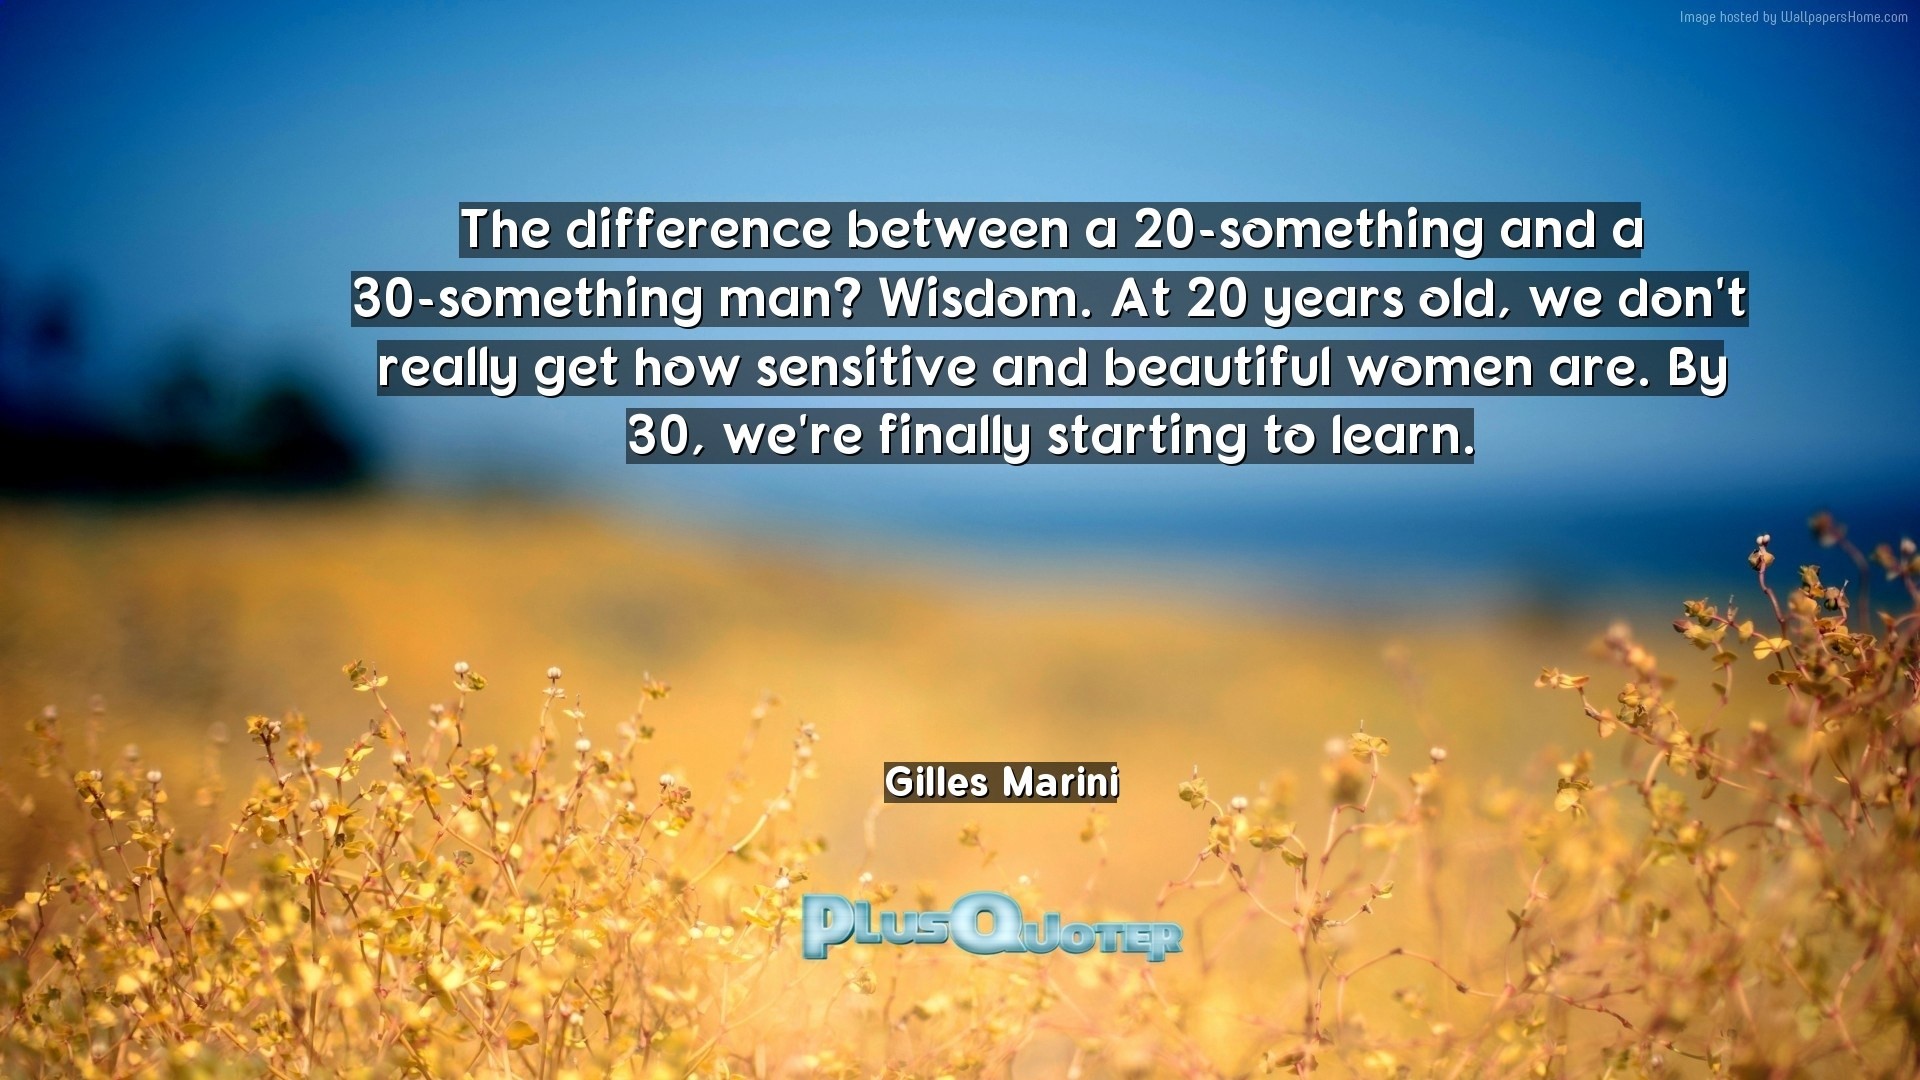 1920x1080 Download Wallpaper with inspirational Quotes- "The difference between a  20-something and a